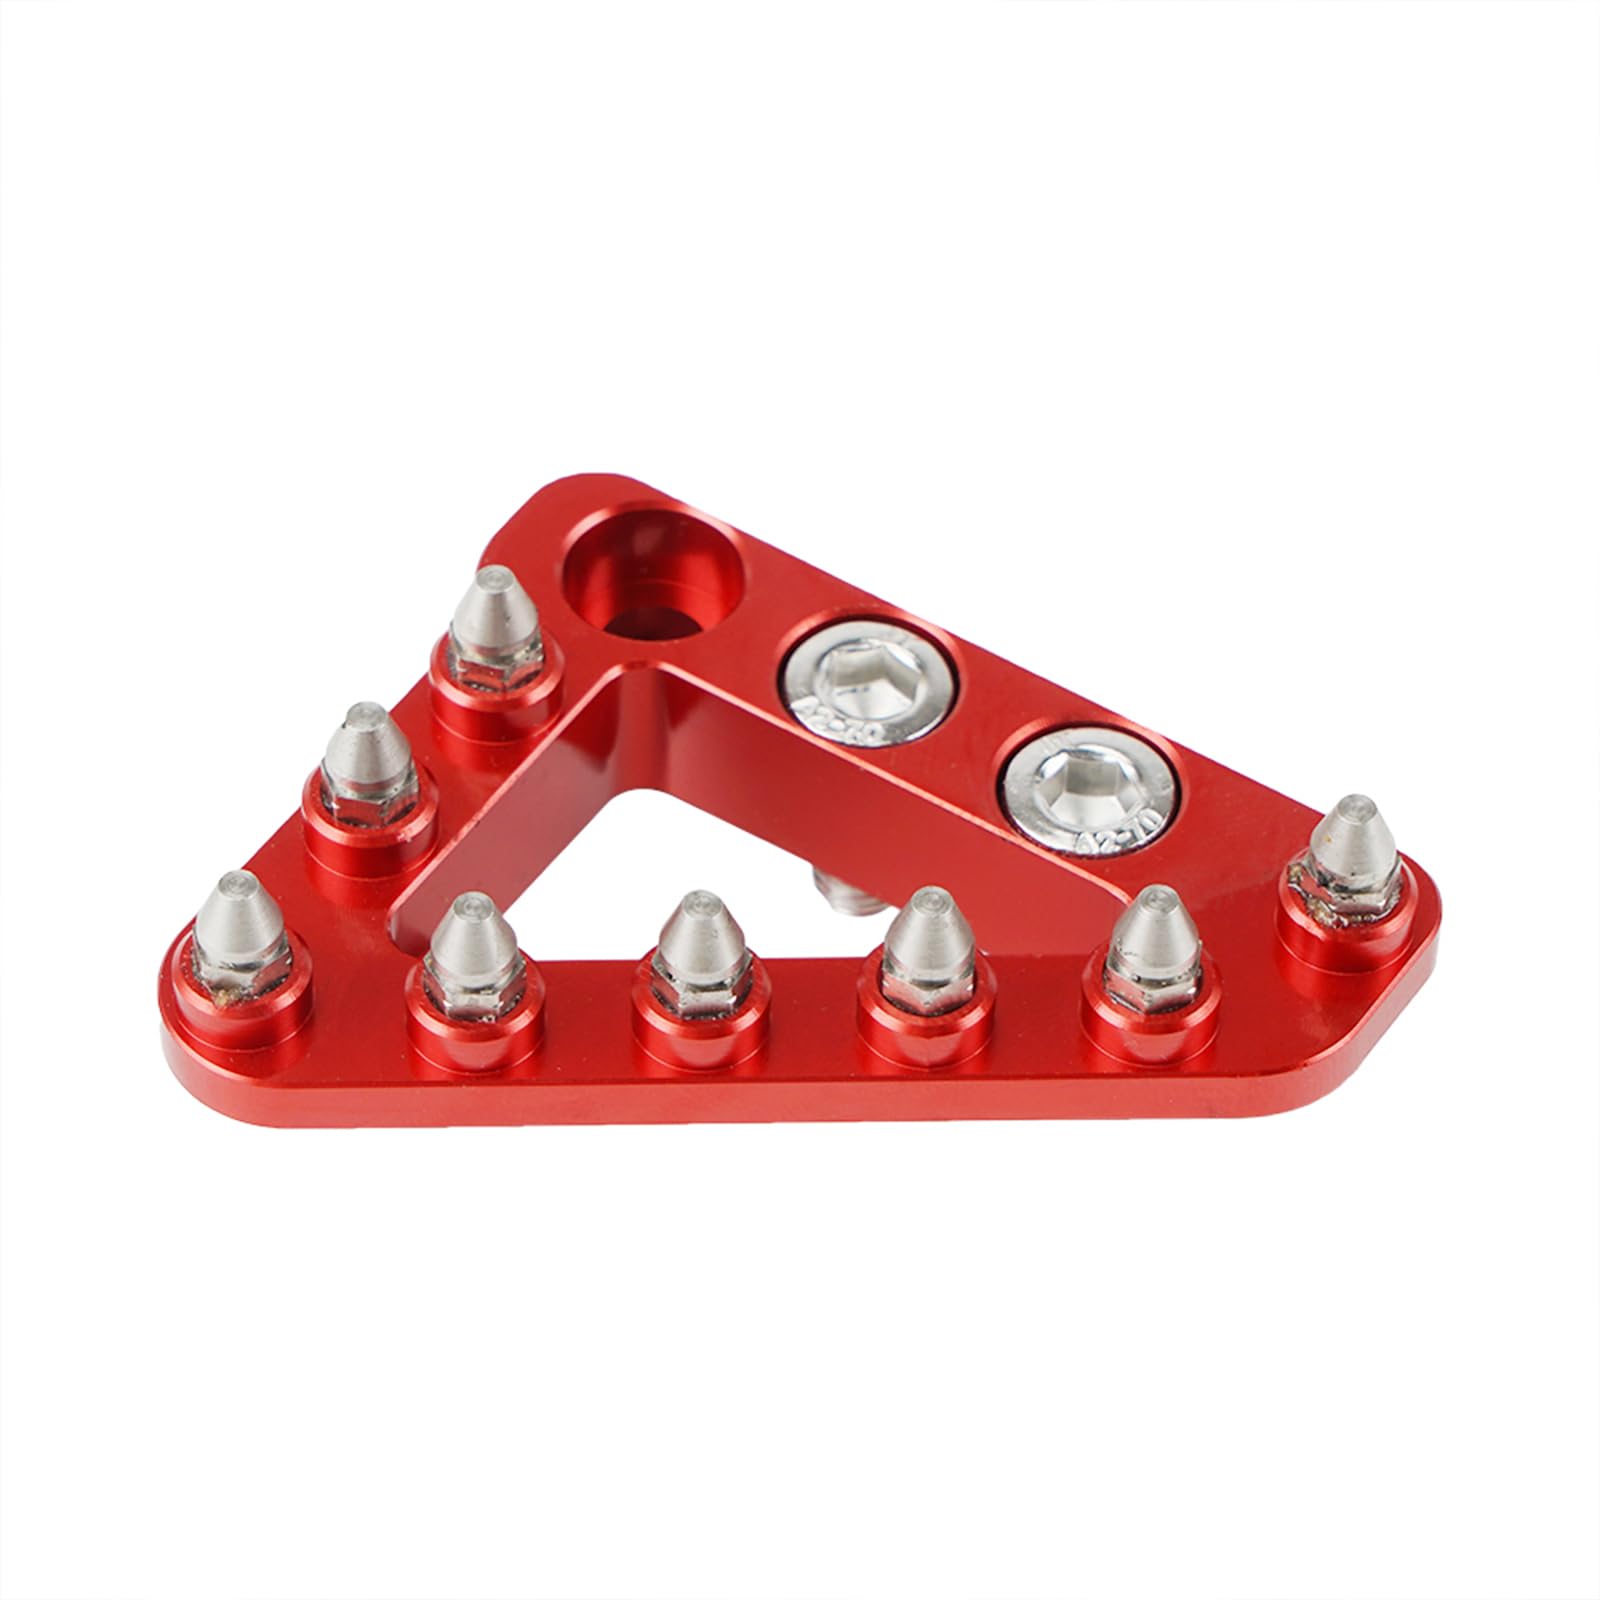 NICECNC Rot Bremspedal Spitze Compatible with Beta RR200/250/300/390/430/450/480/500/Xtrainer 300,See Fitment von NICECNC